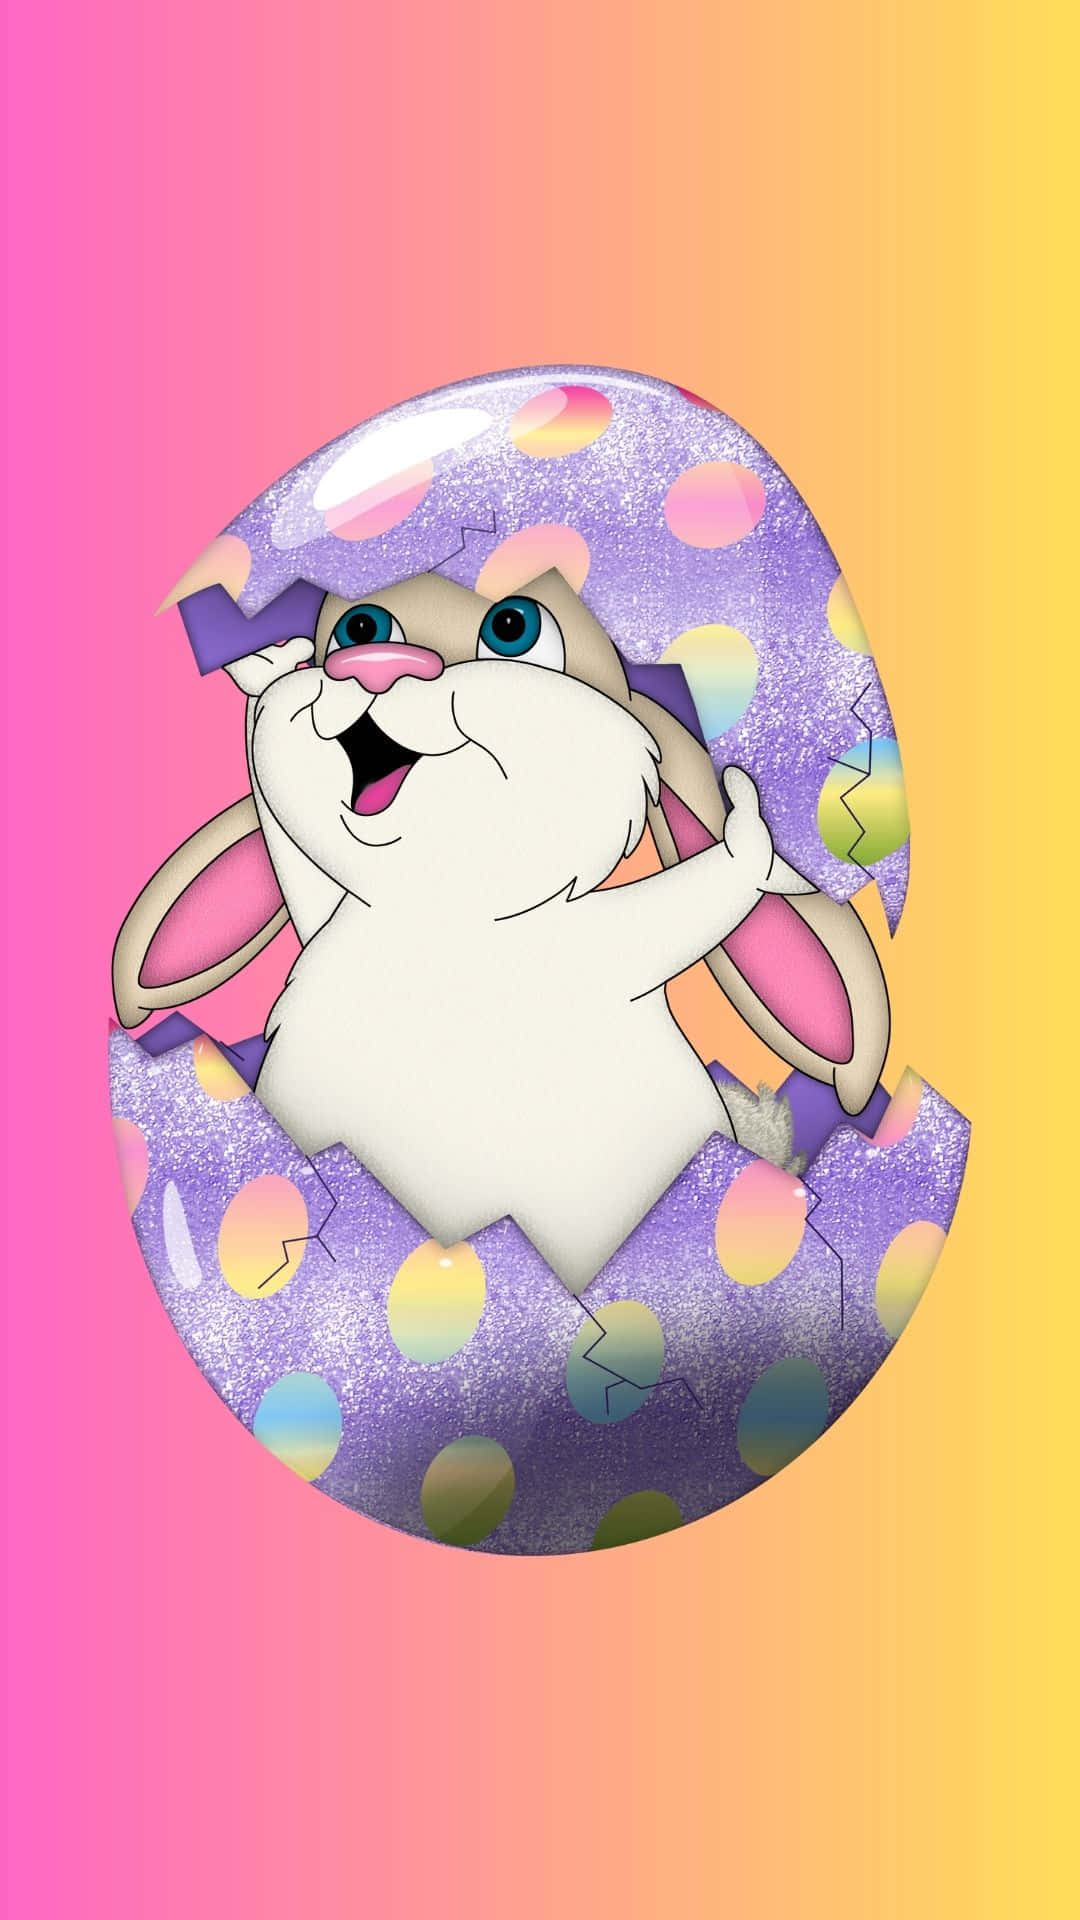 Celebrating Easter with the Easter Bunny! Wallpaper